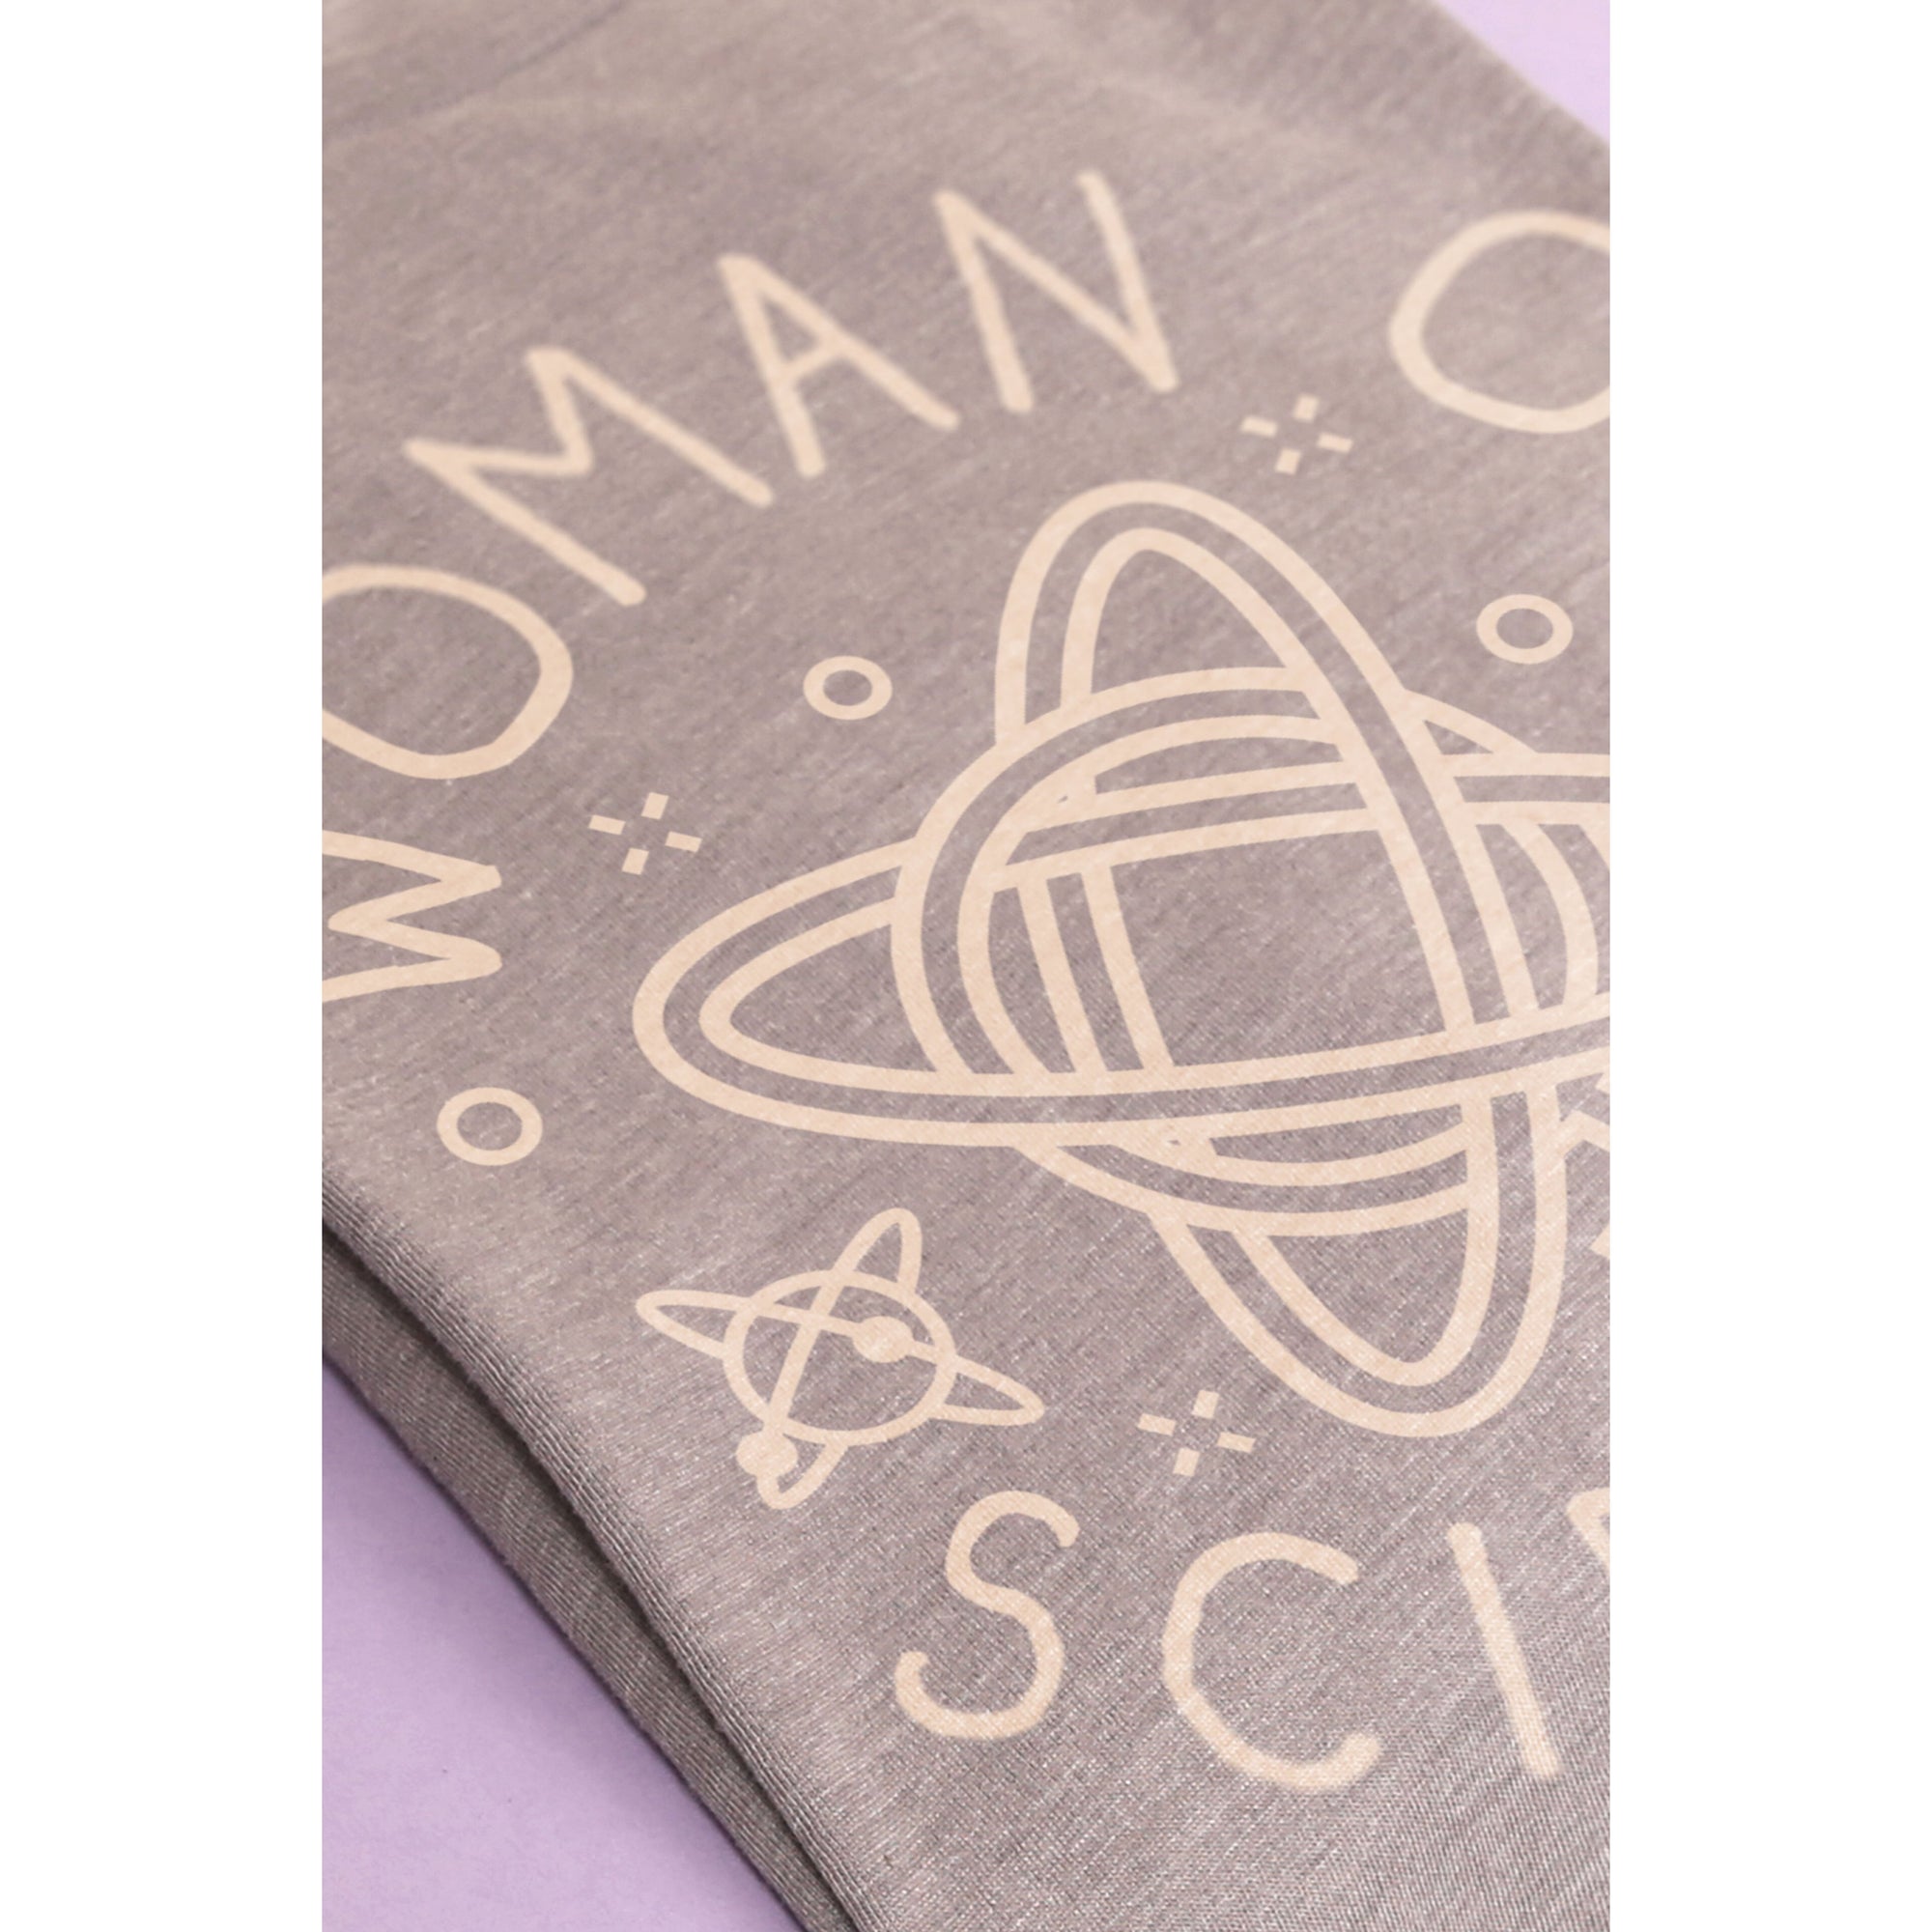 Woman Of Science - Stories You Can Wear